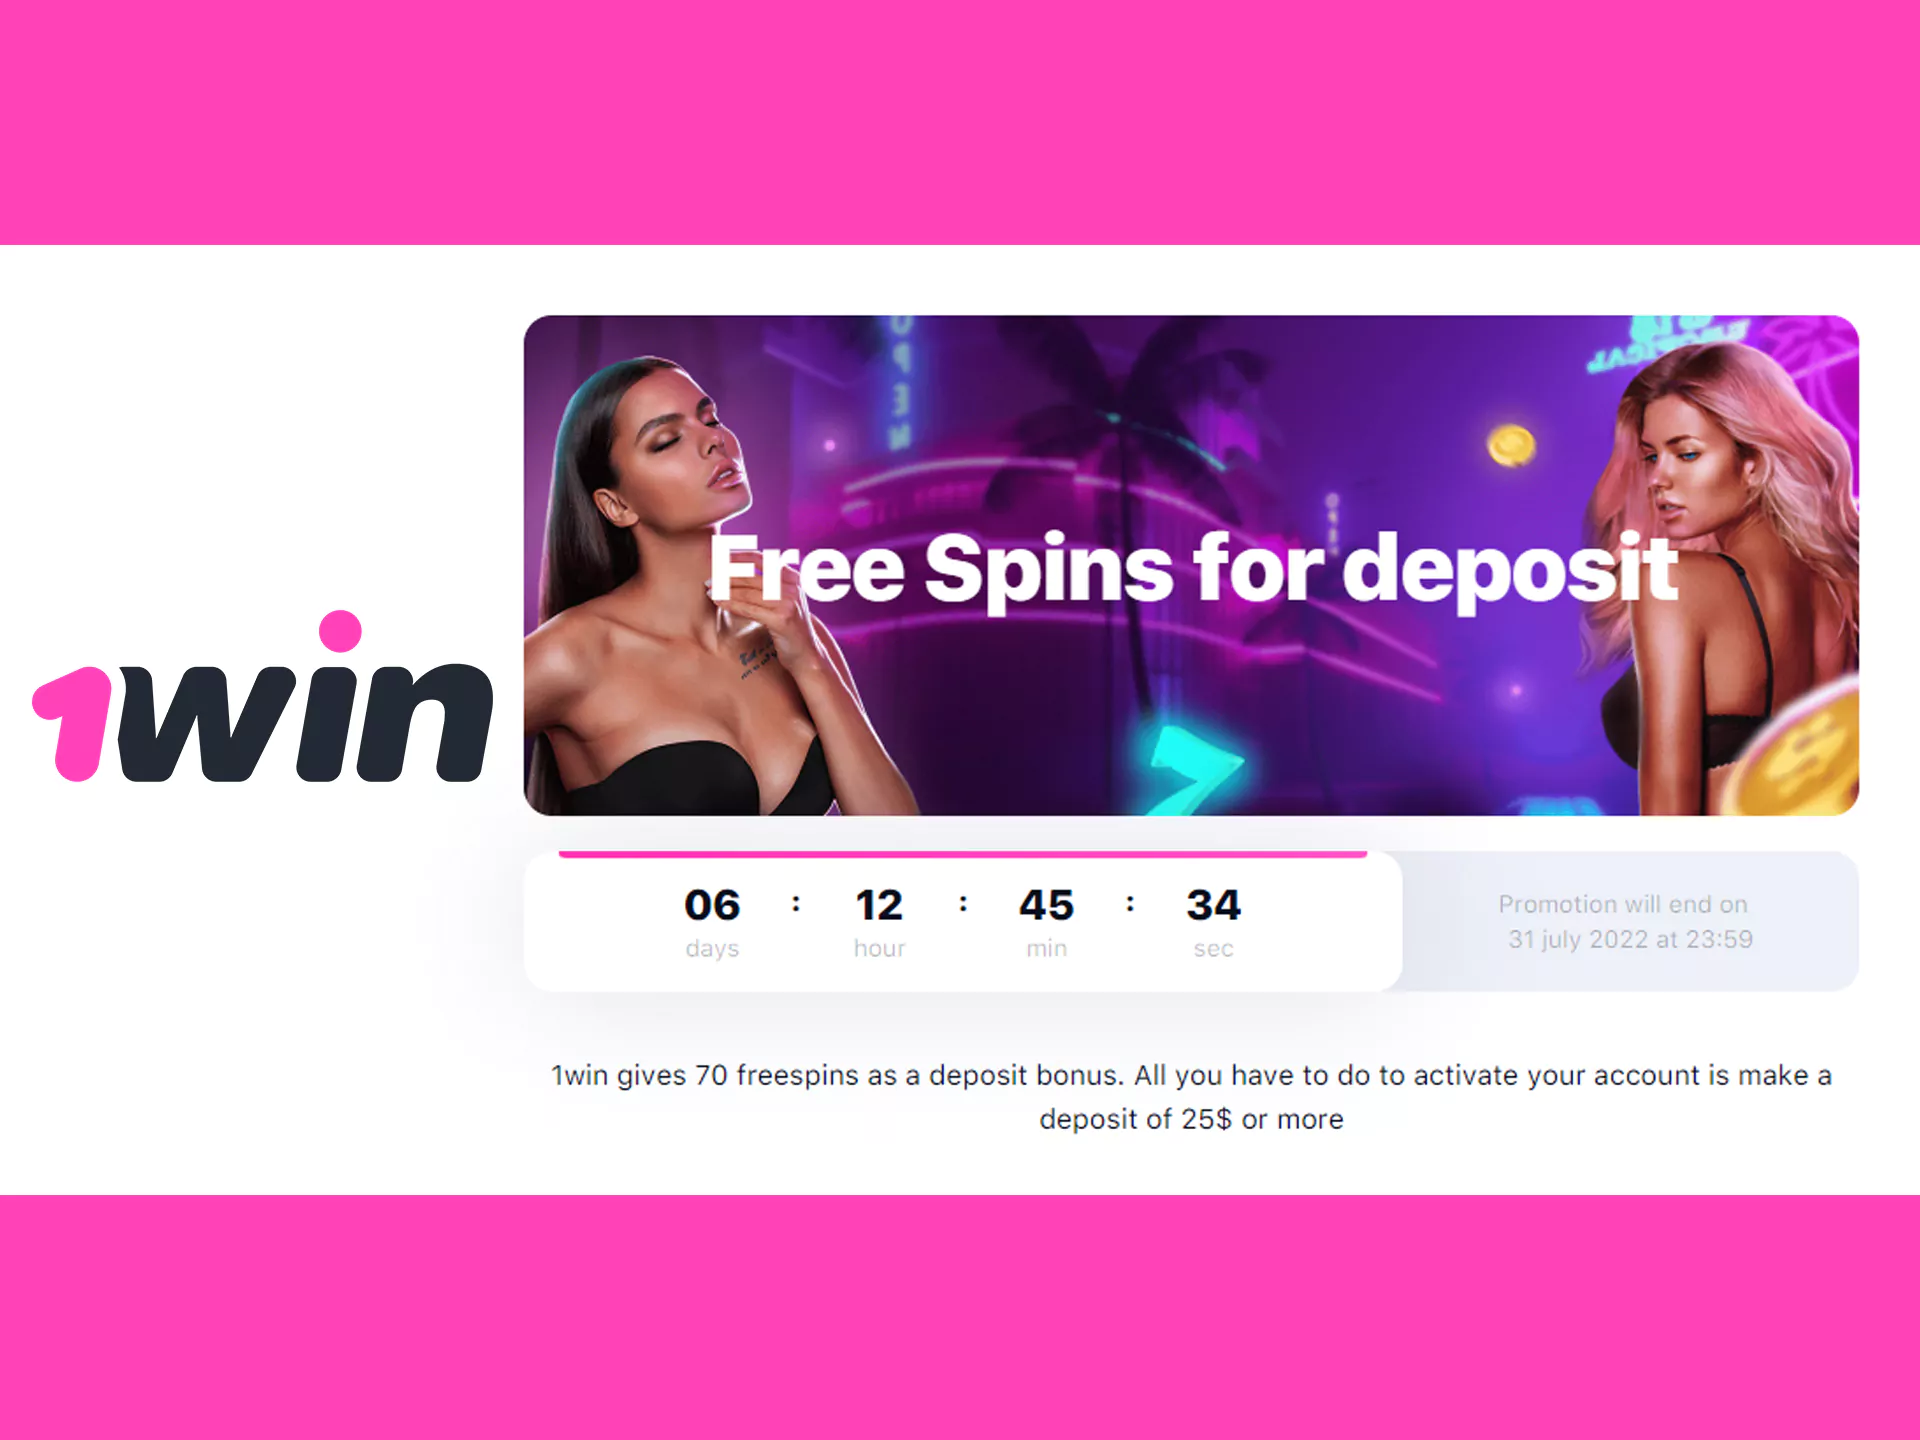 You can get free spins after the first deposit.